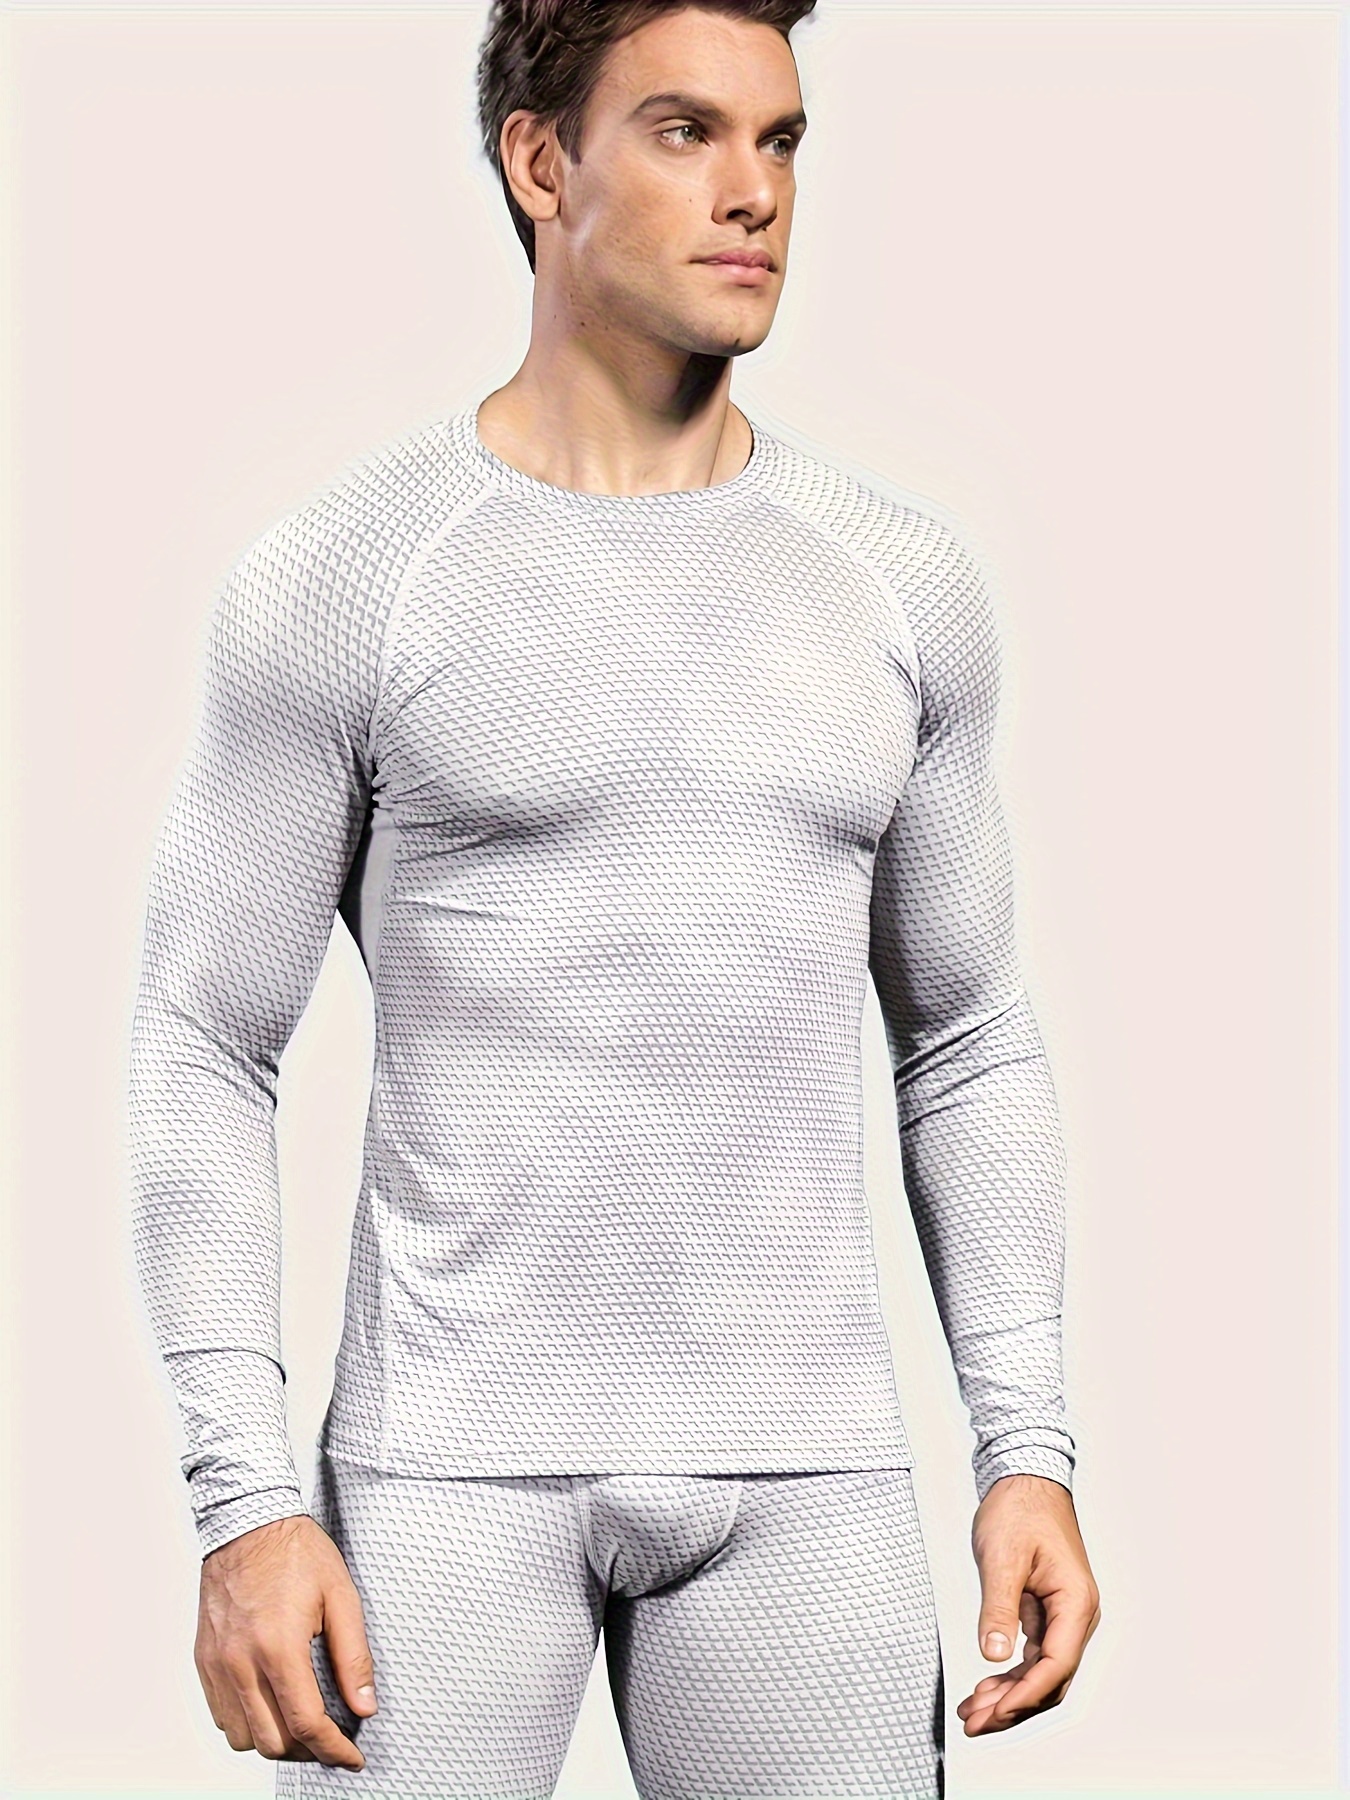 Mens Quick Drying Running Set With Thermo Compression Underwear For Men And  XxxxL Skin Compression For Gym, Jogging, Fitness, MMA, And Rashgard Track  211006 From Kong003, $10